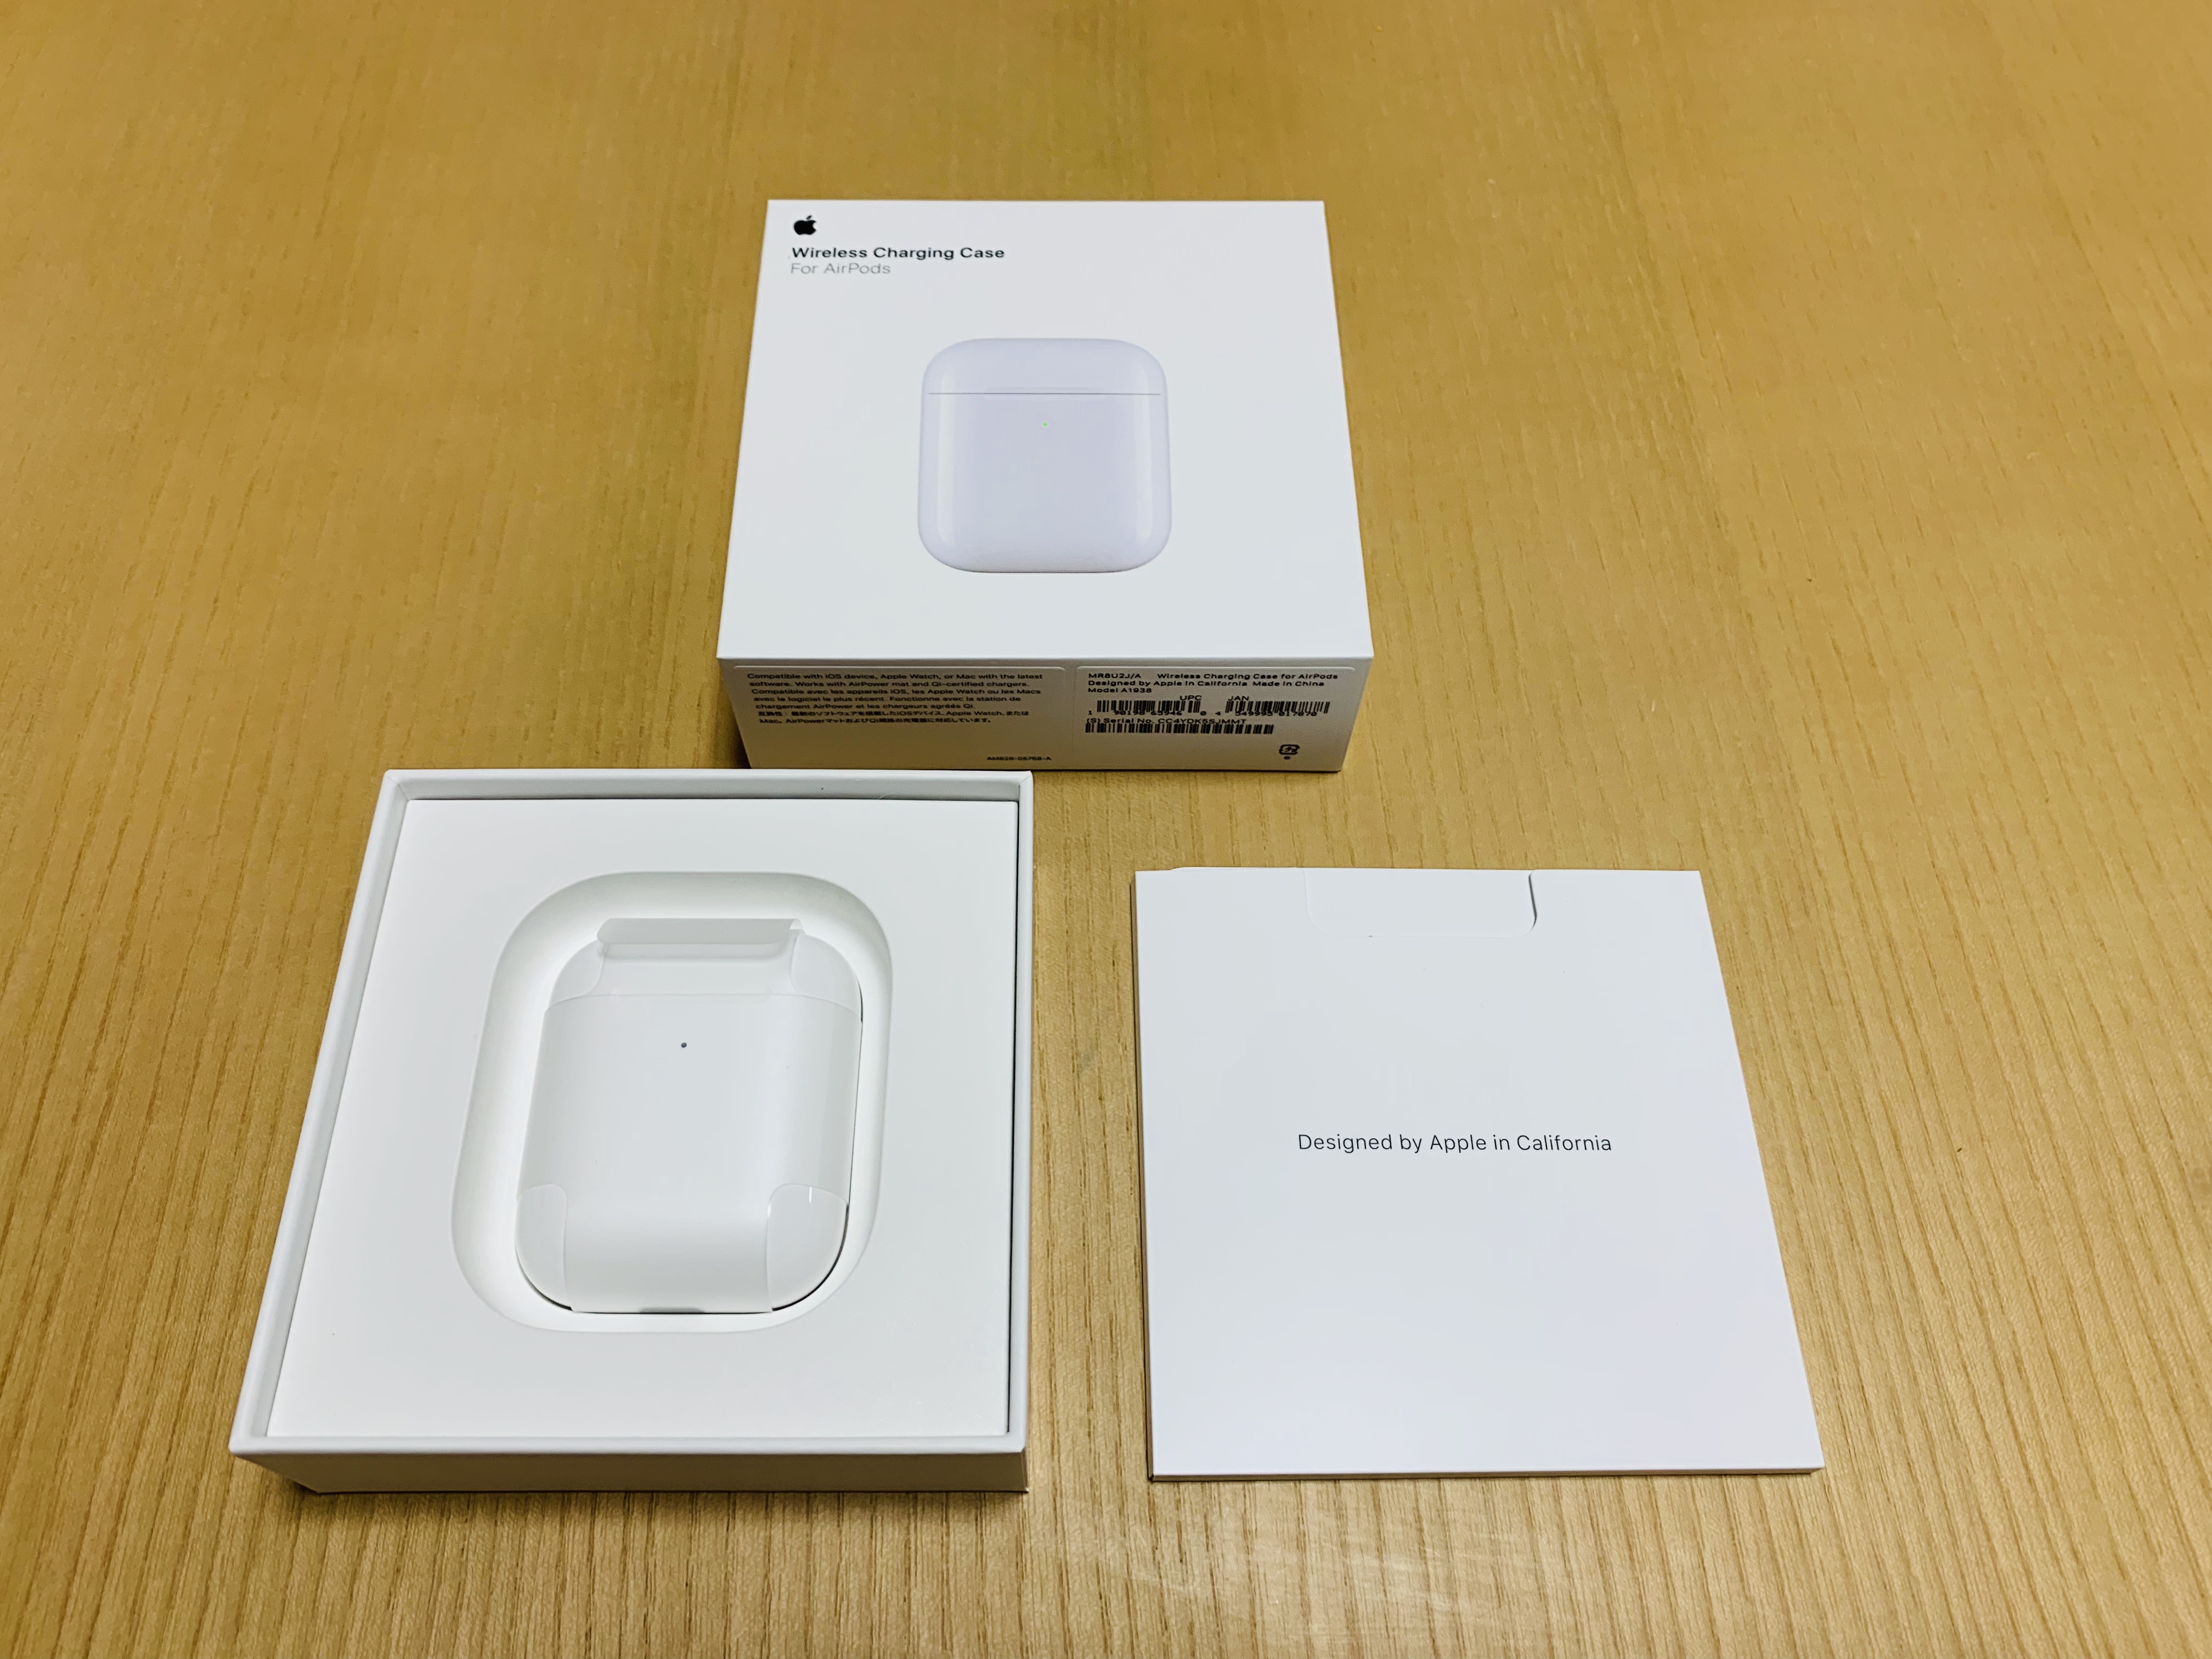 Wireless Charging Case for AirPodsのワイヤレス充電は3つのメリットがあっておすすめ | かまわん行こう！